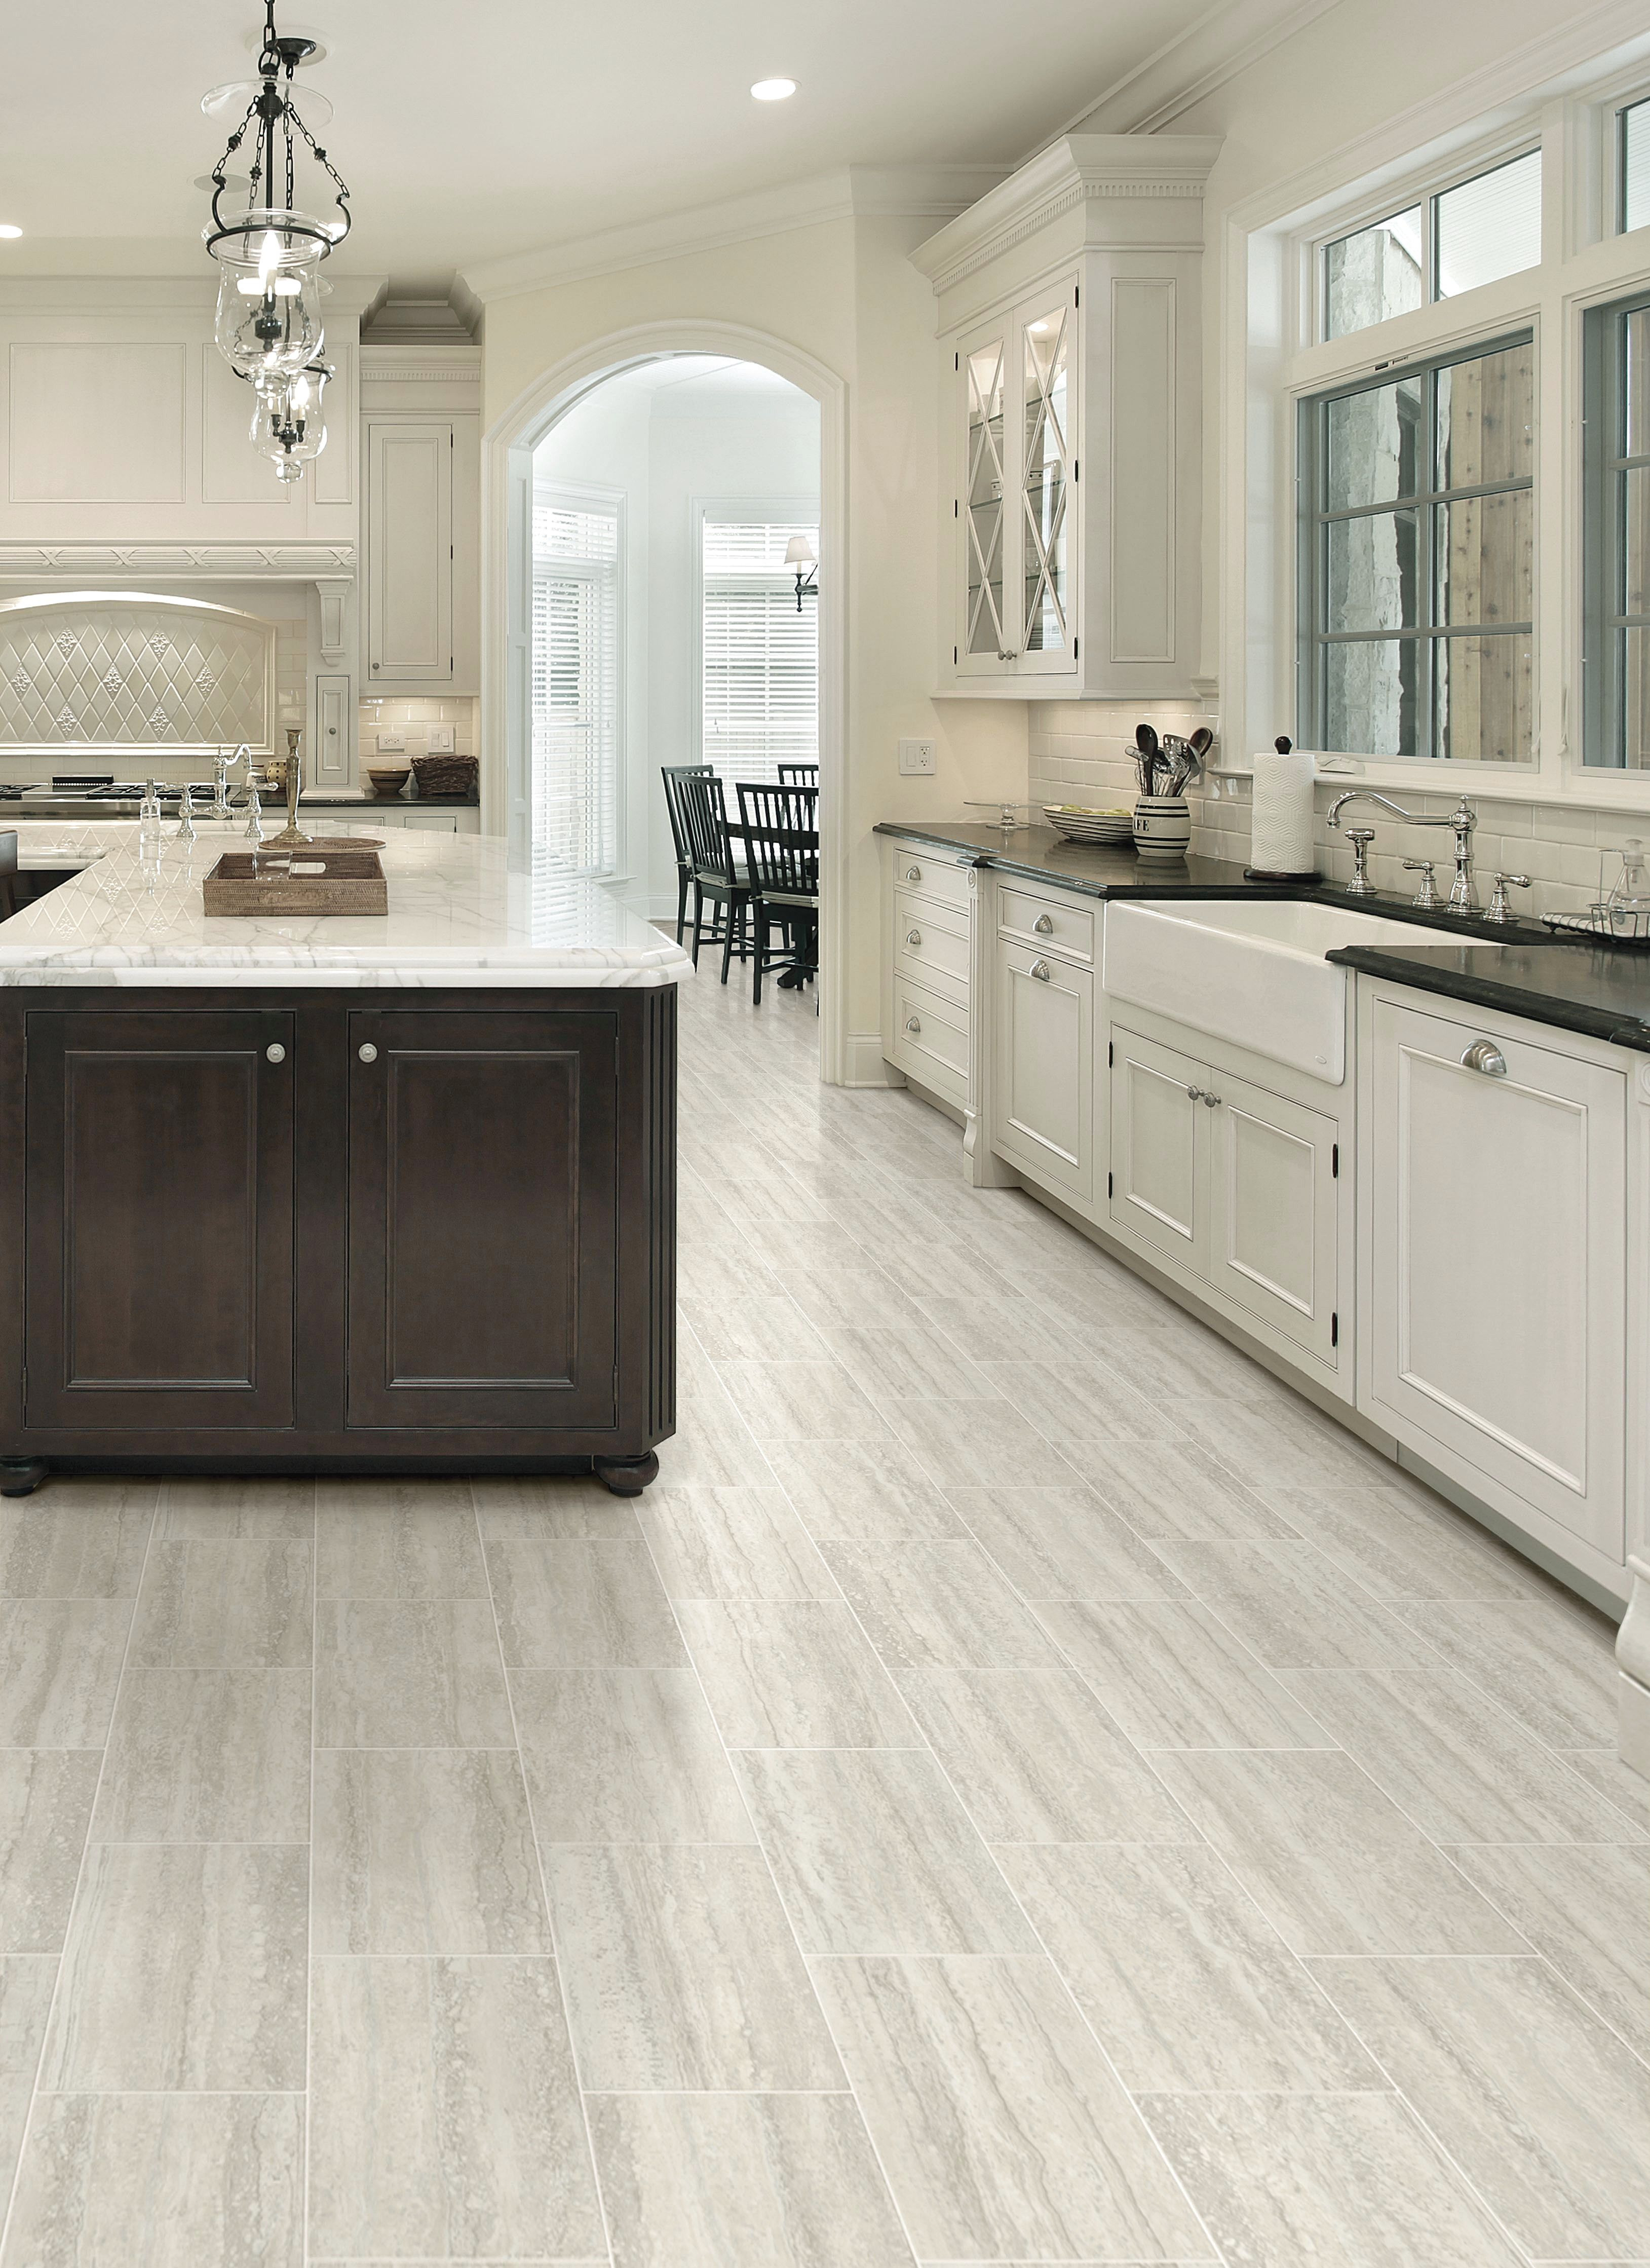 hardwood flooring east brunswick nj of stone flooring cost all about kitchen in 2018 pinterest with regard to stone flooring cost